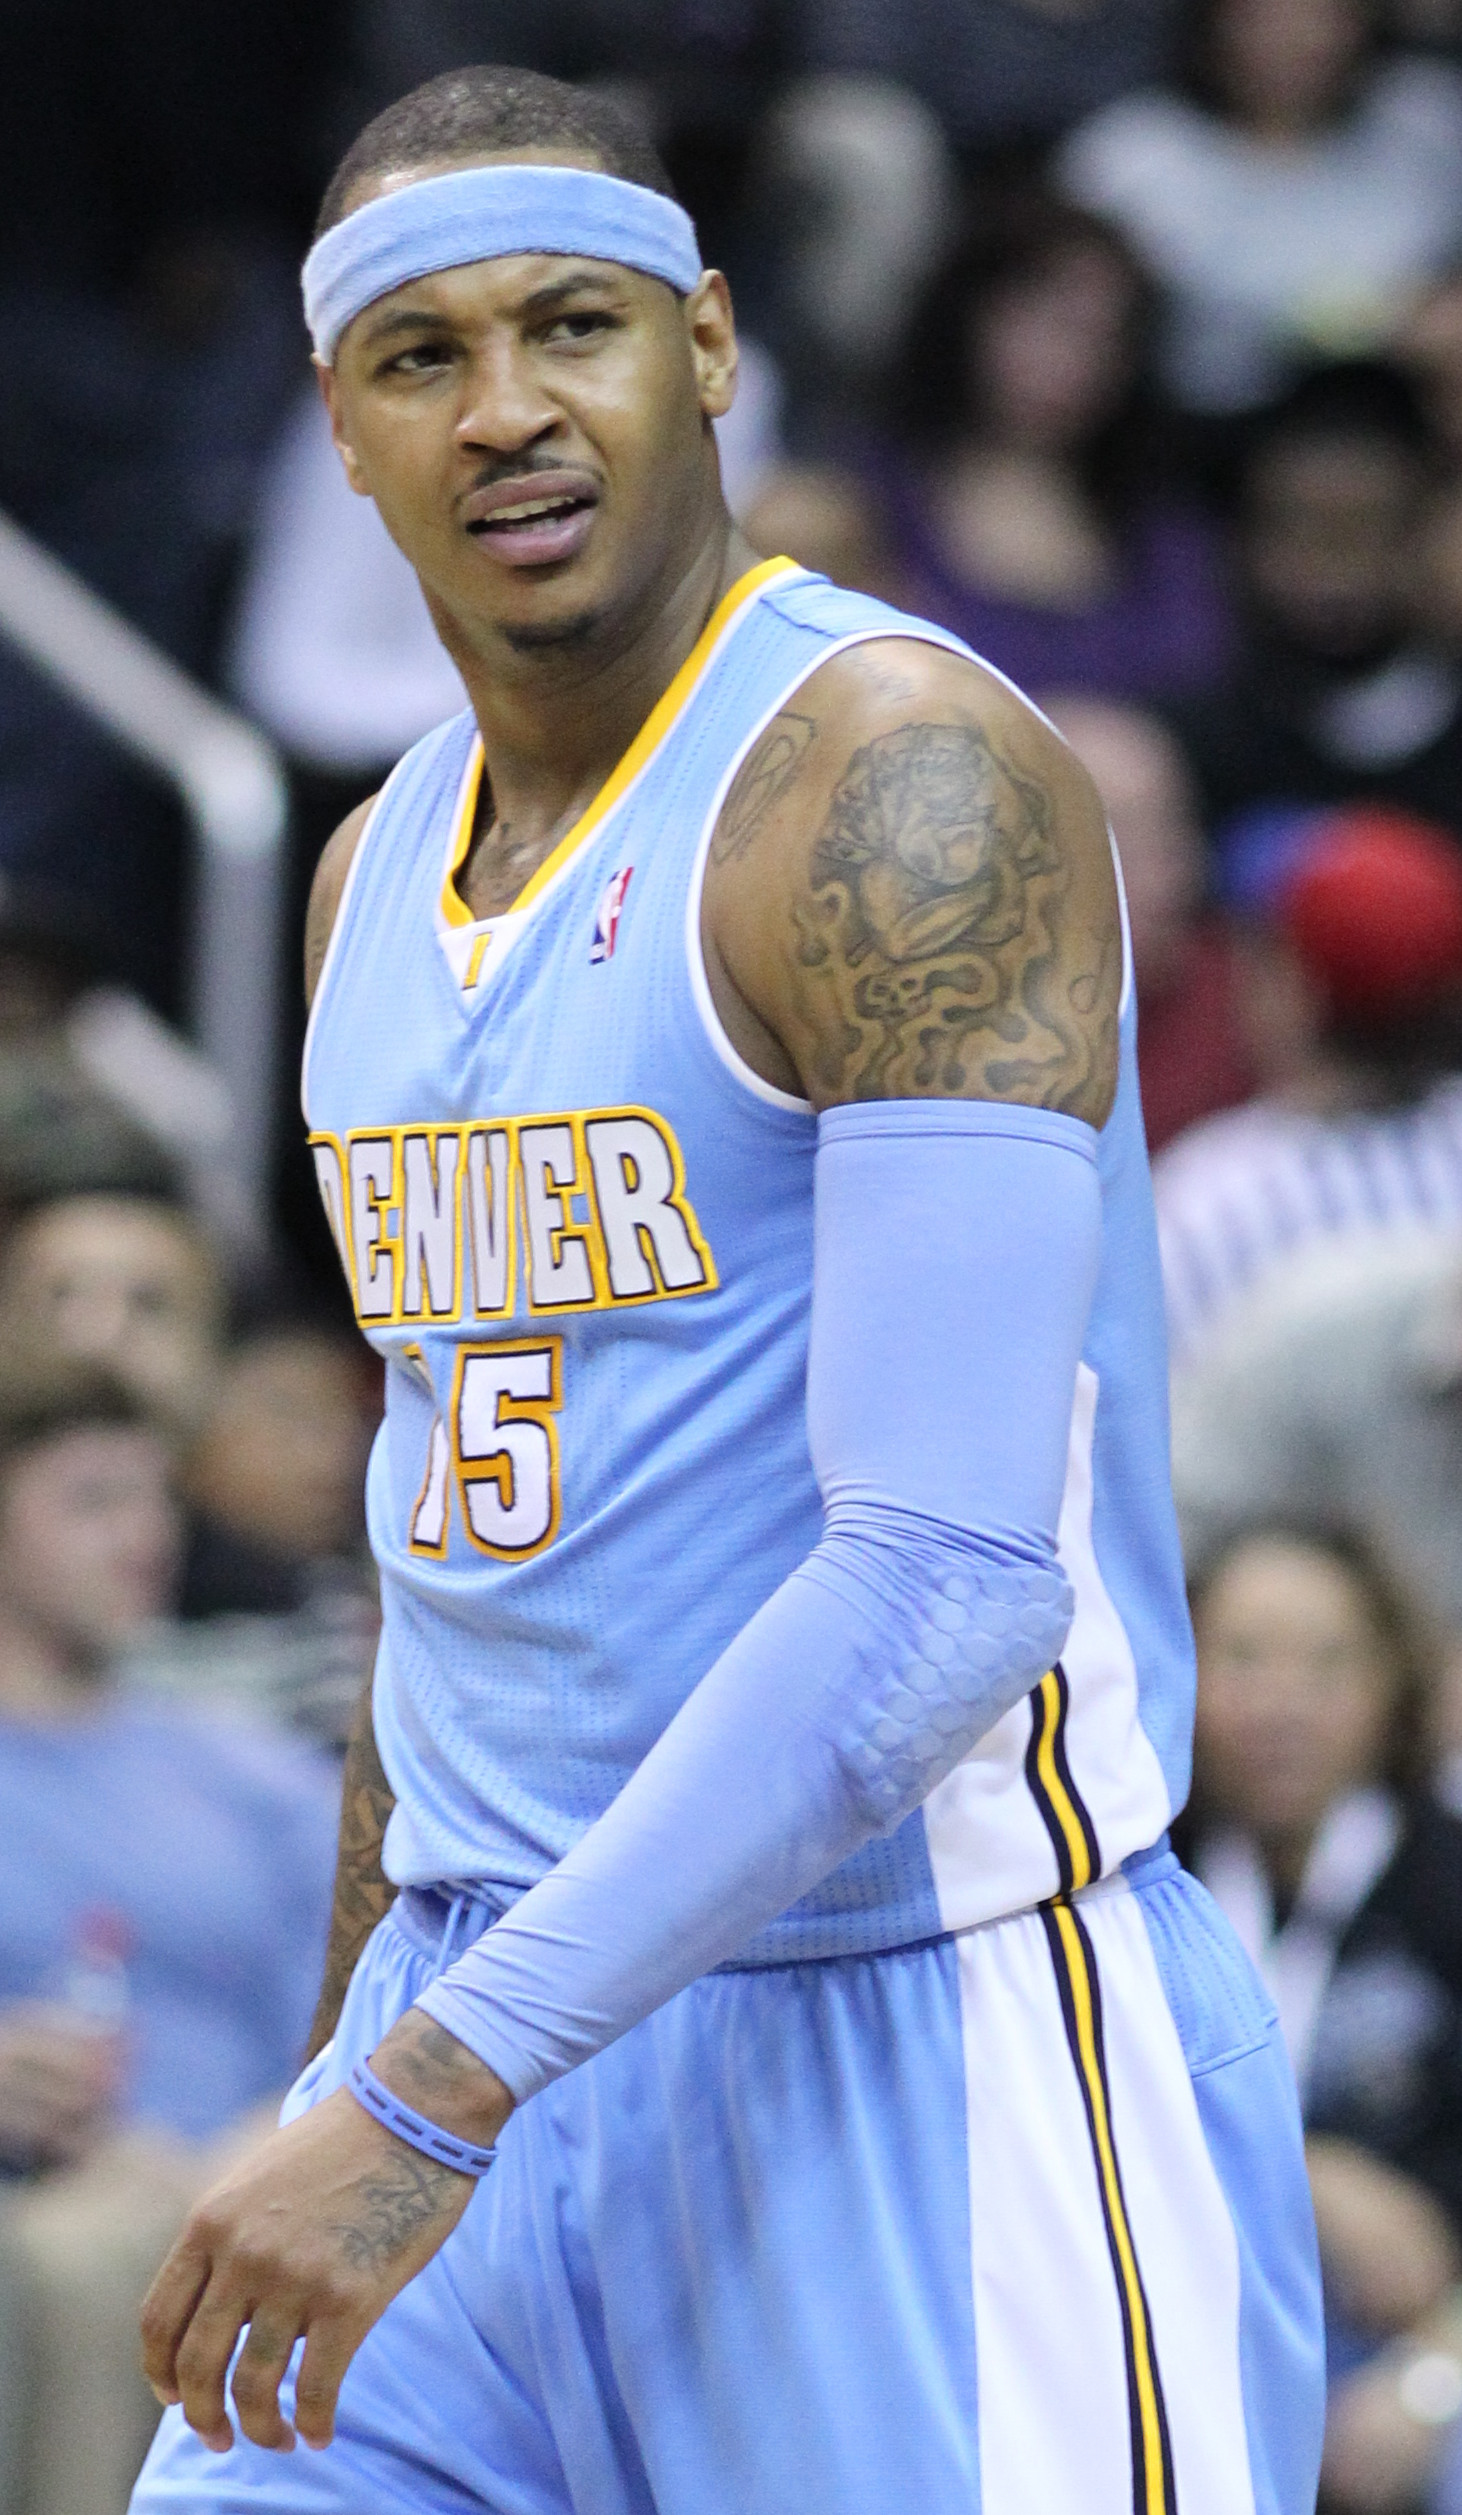 1462x2515 File:Carmelo Anthony Nuggets.jpg